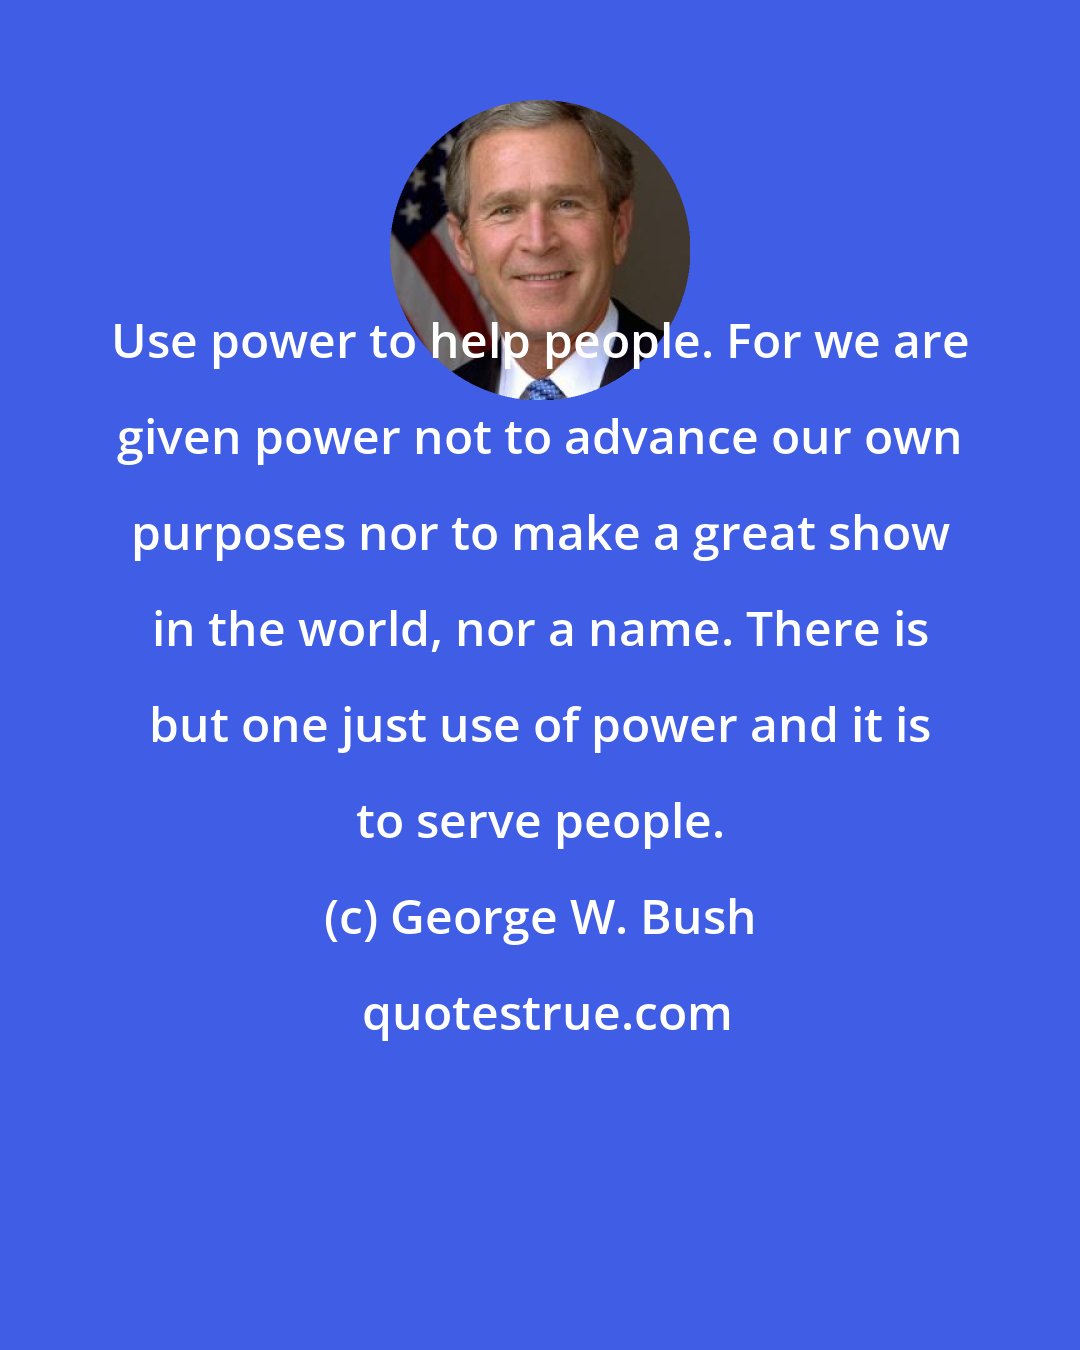 George W. Bush: Use power to help people. For we are given power not to advance our own purposes nor to make a great show in the world, nor a name. There is but one just use of power and it is to serve people.